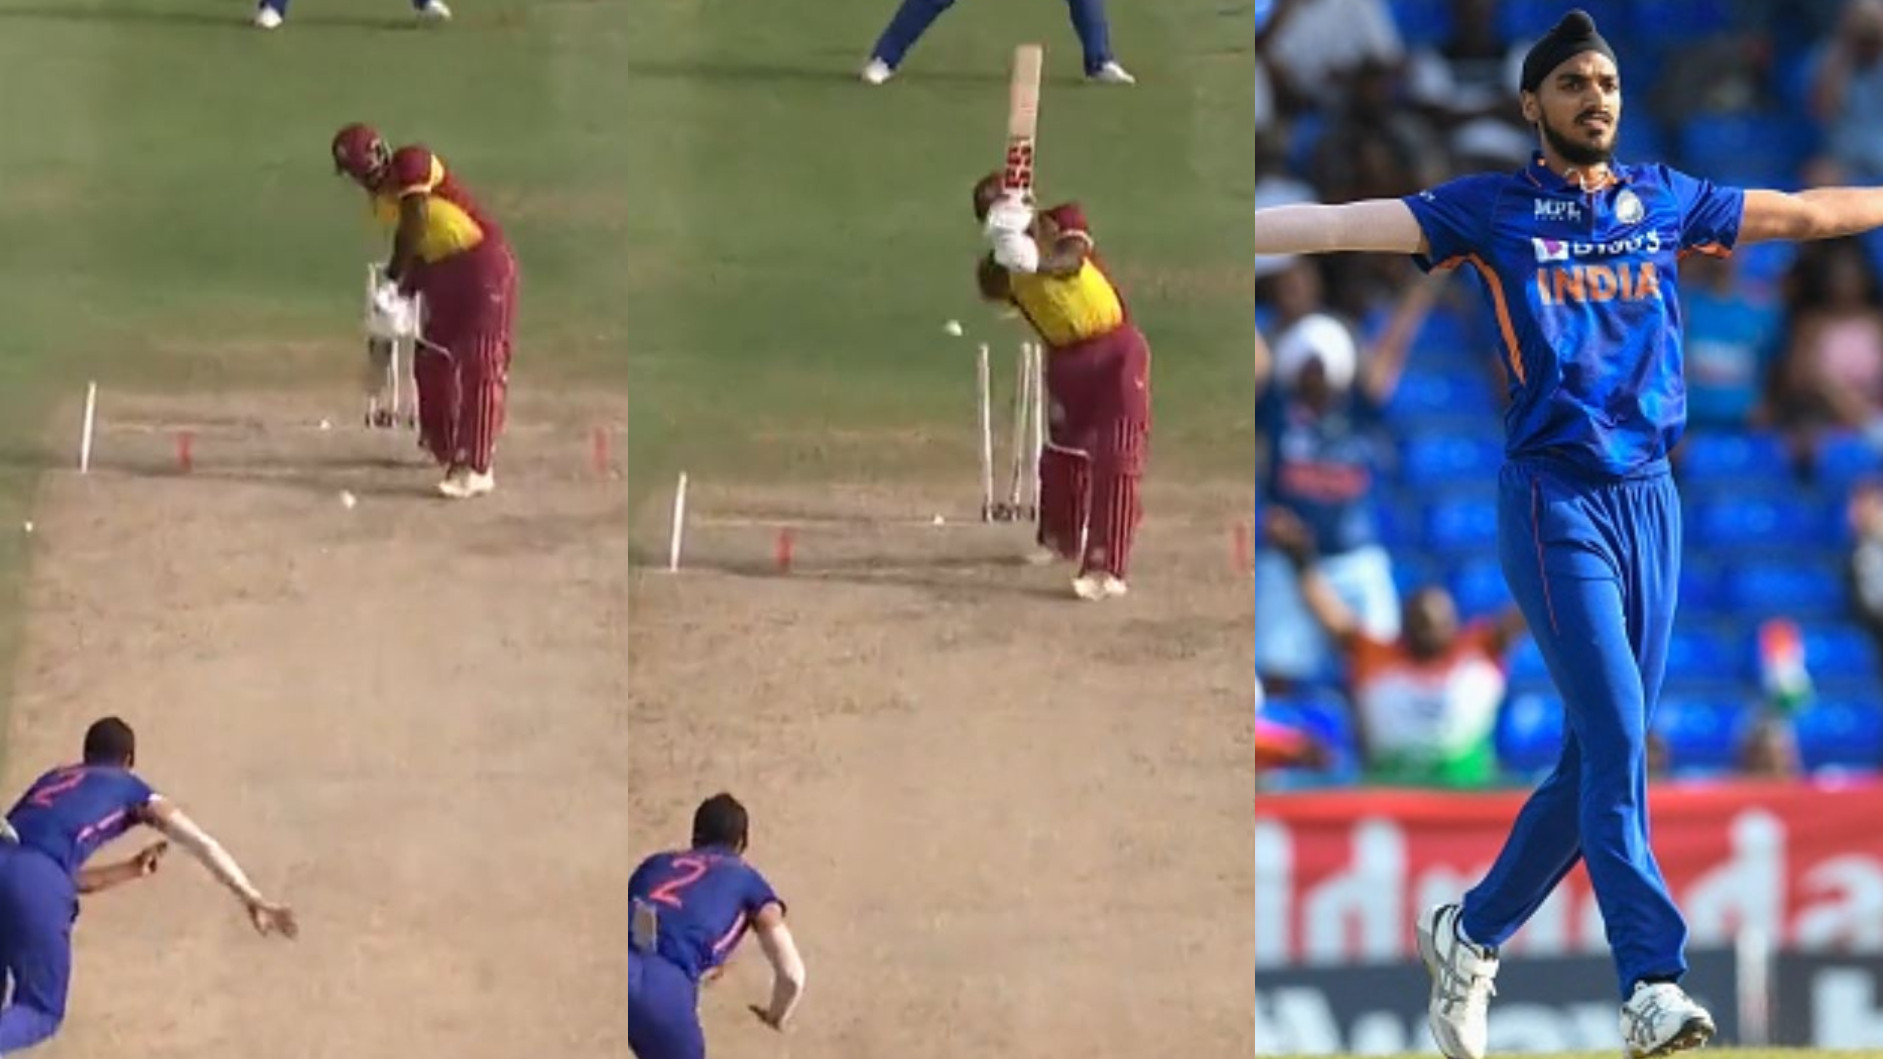 WI v IND 2022: WATCH- Arshdeep Singh’s peach of a yorker to Rovman Powell; Twitterati laud his death overs bowling